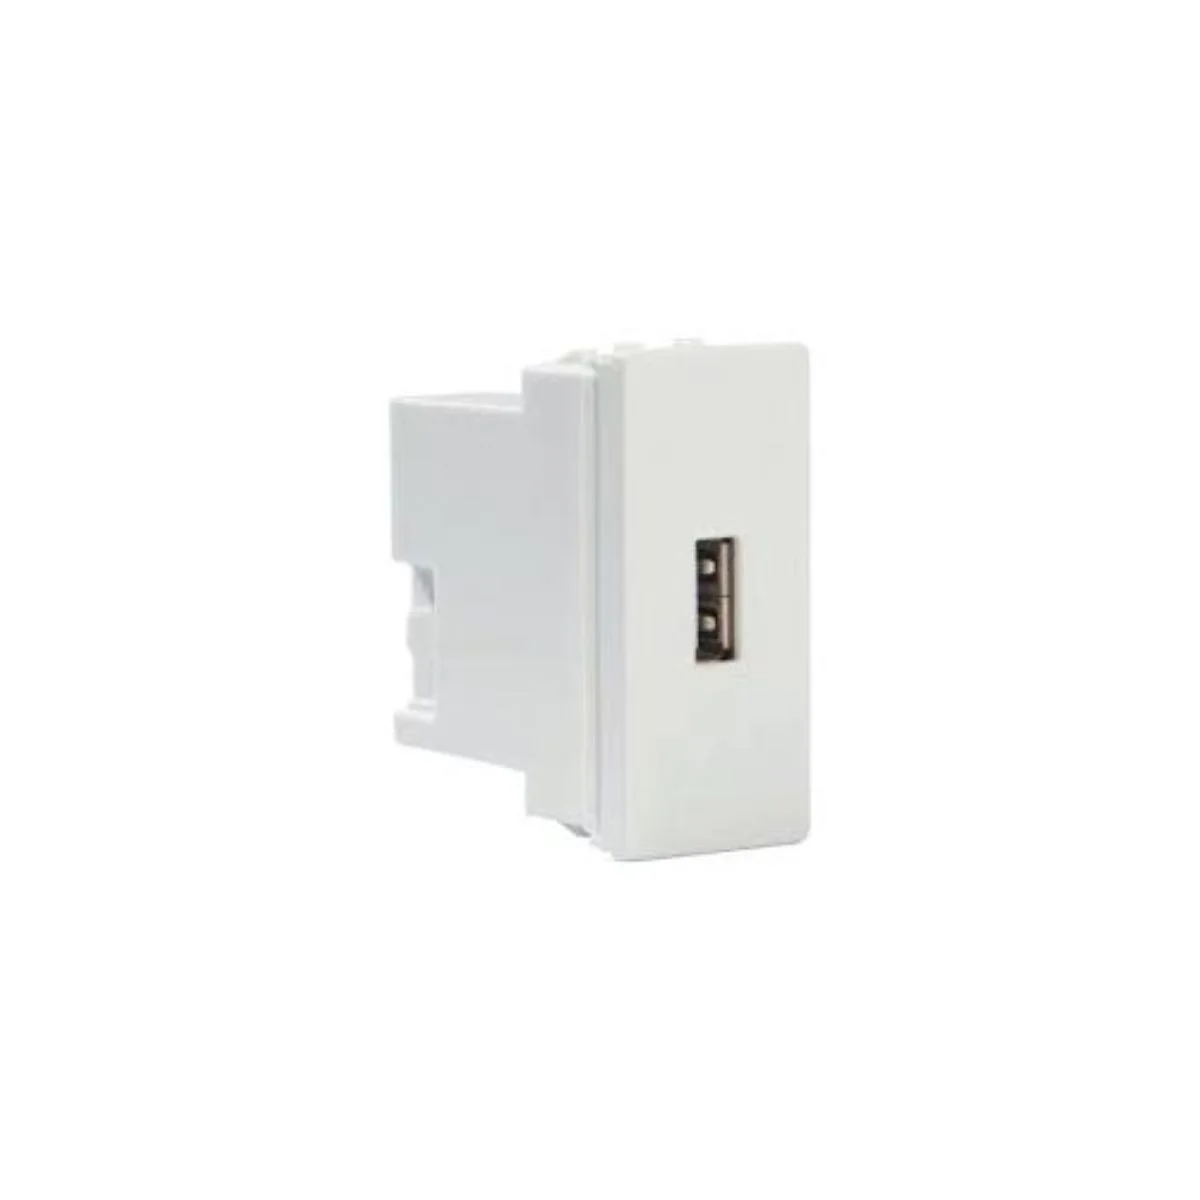 Havells Crabtree Athena Buzzer -2M Support Modules White - ElectricBasket